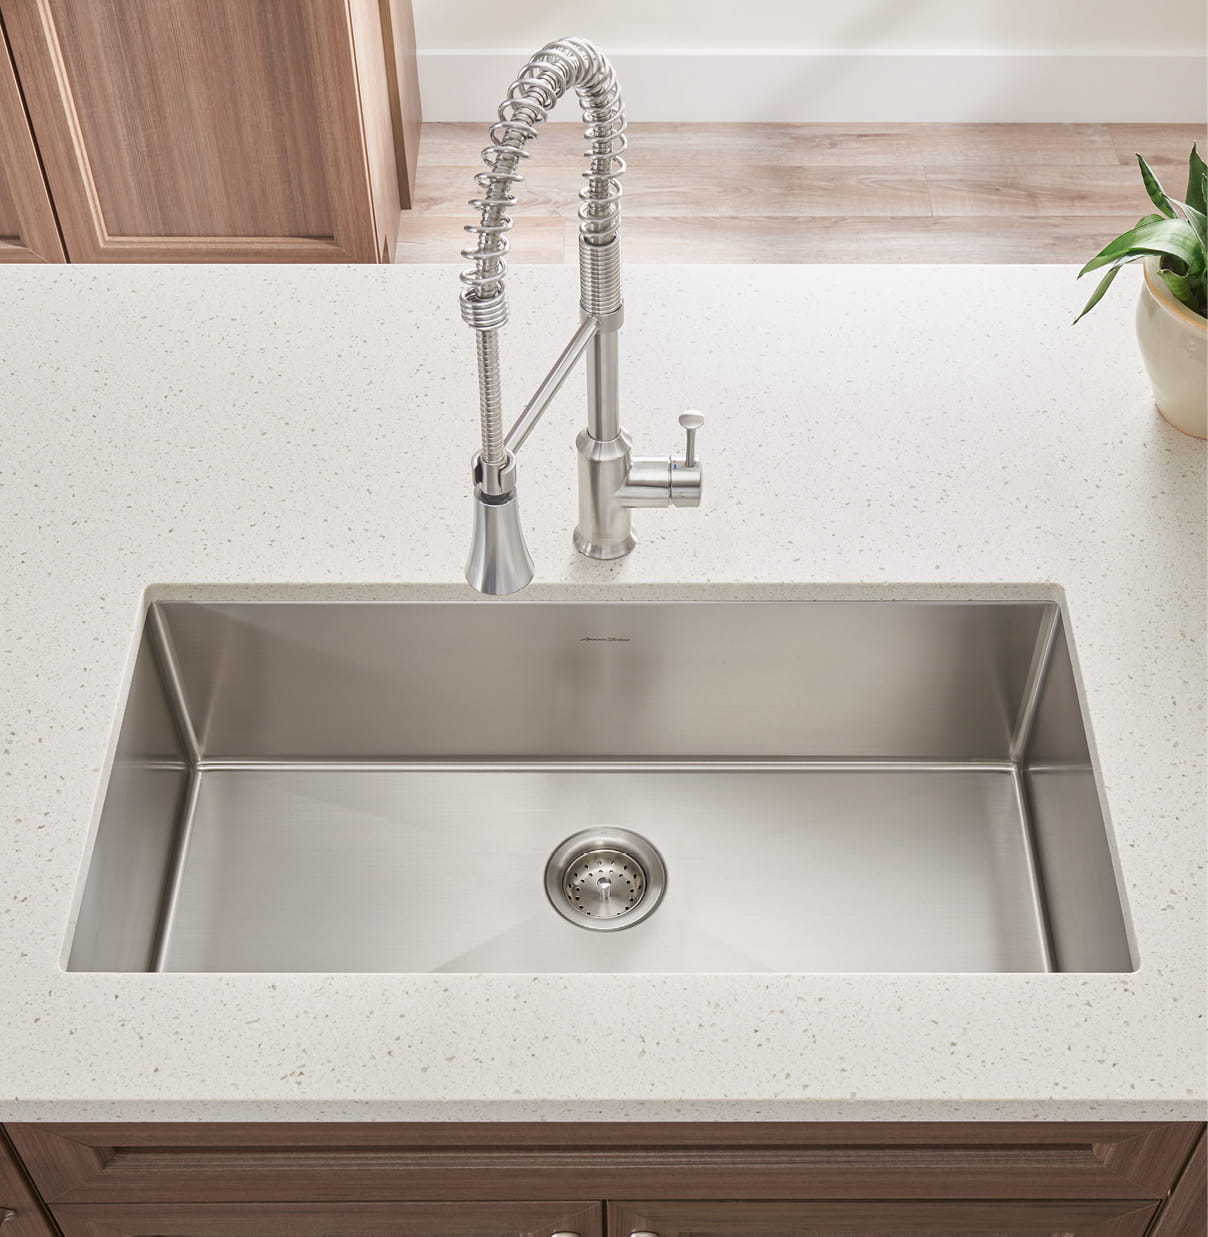 Choosing the Perfect Sink Exploring Common Sink Options